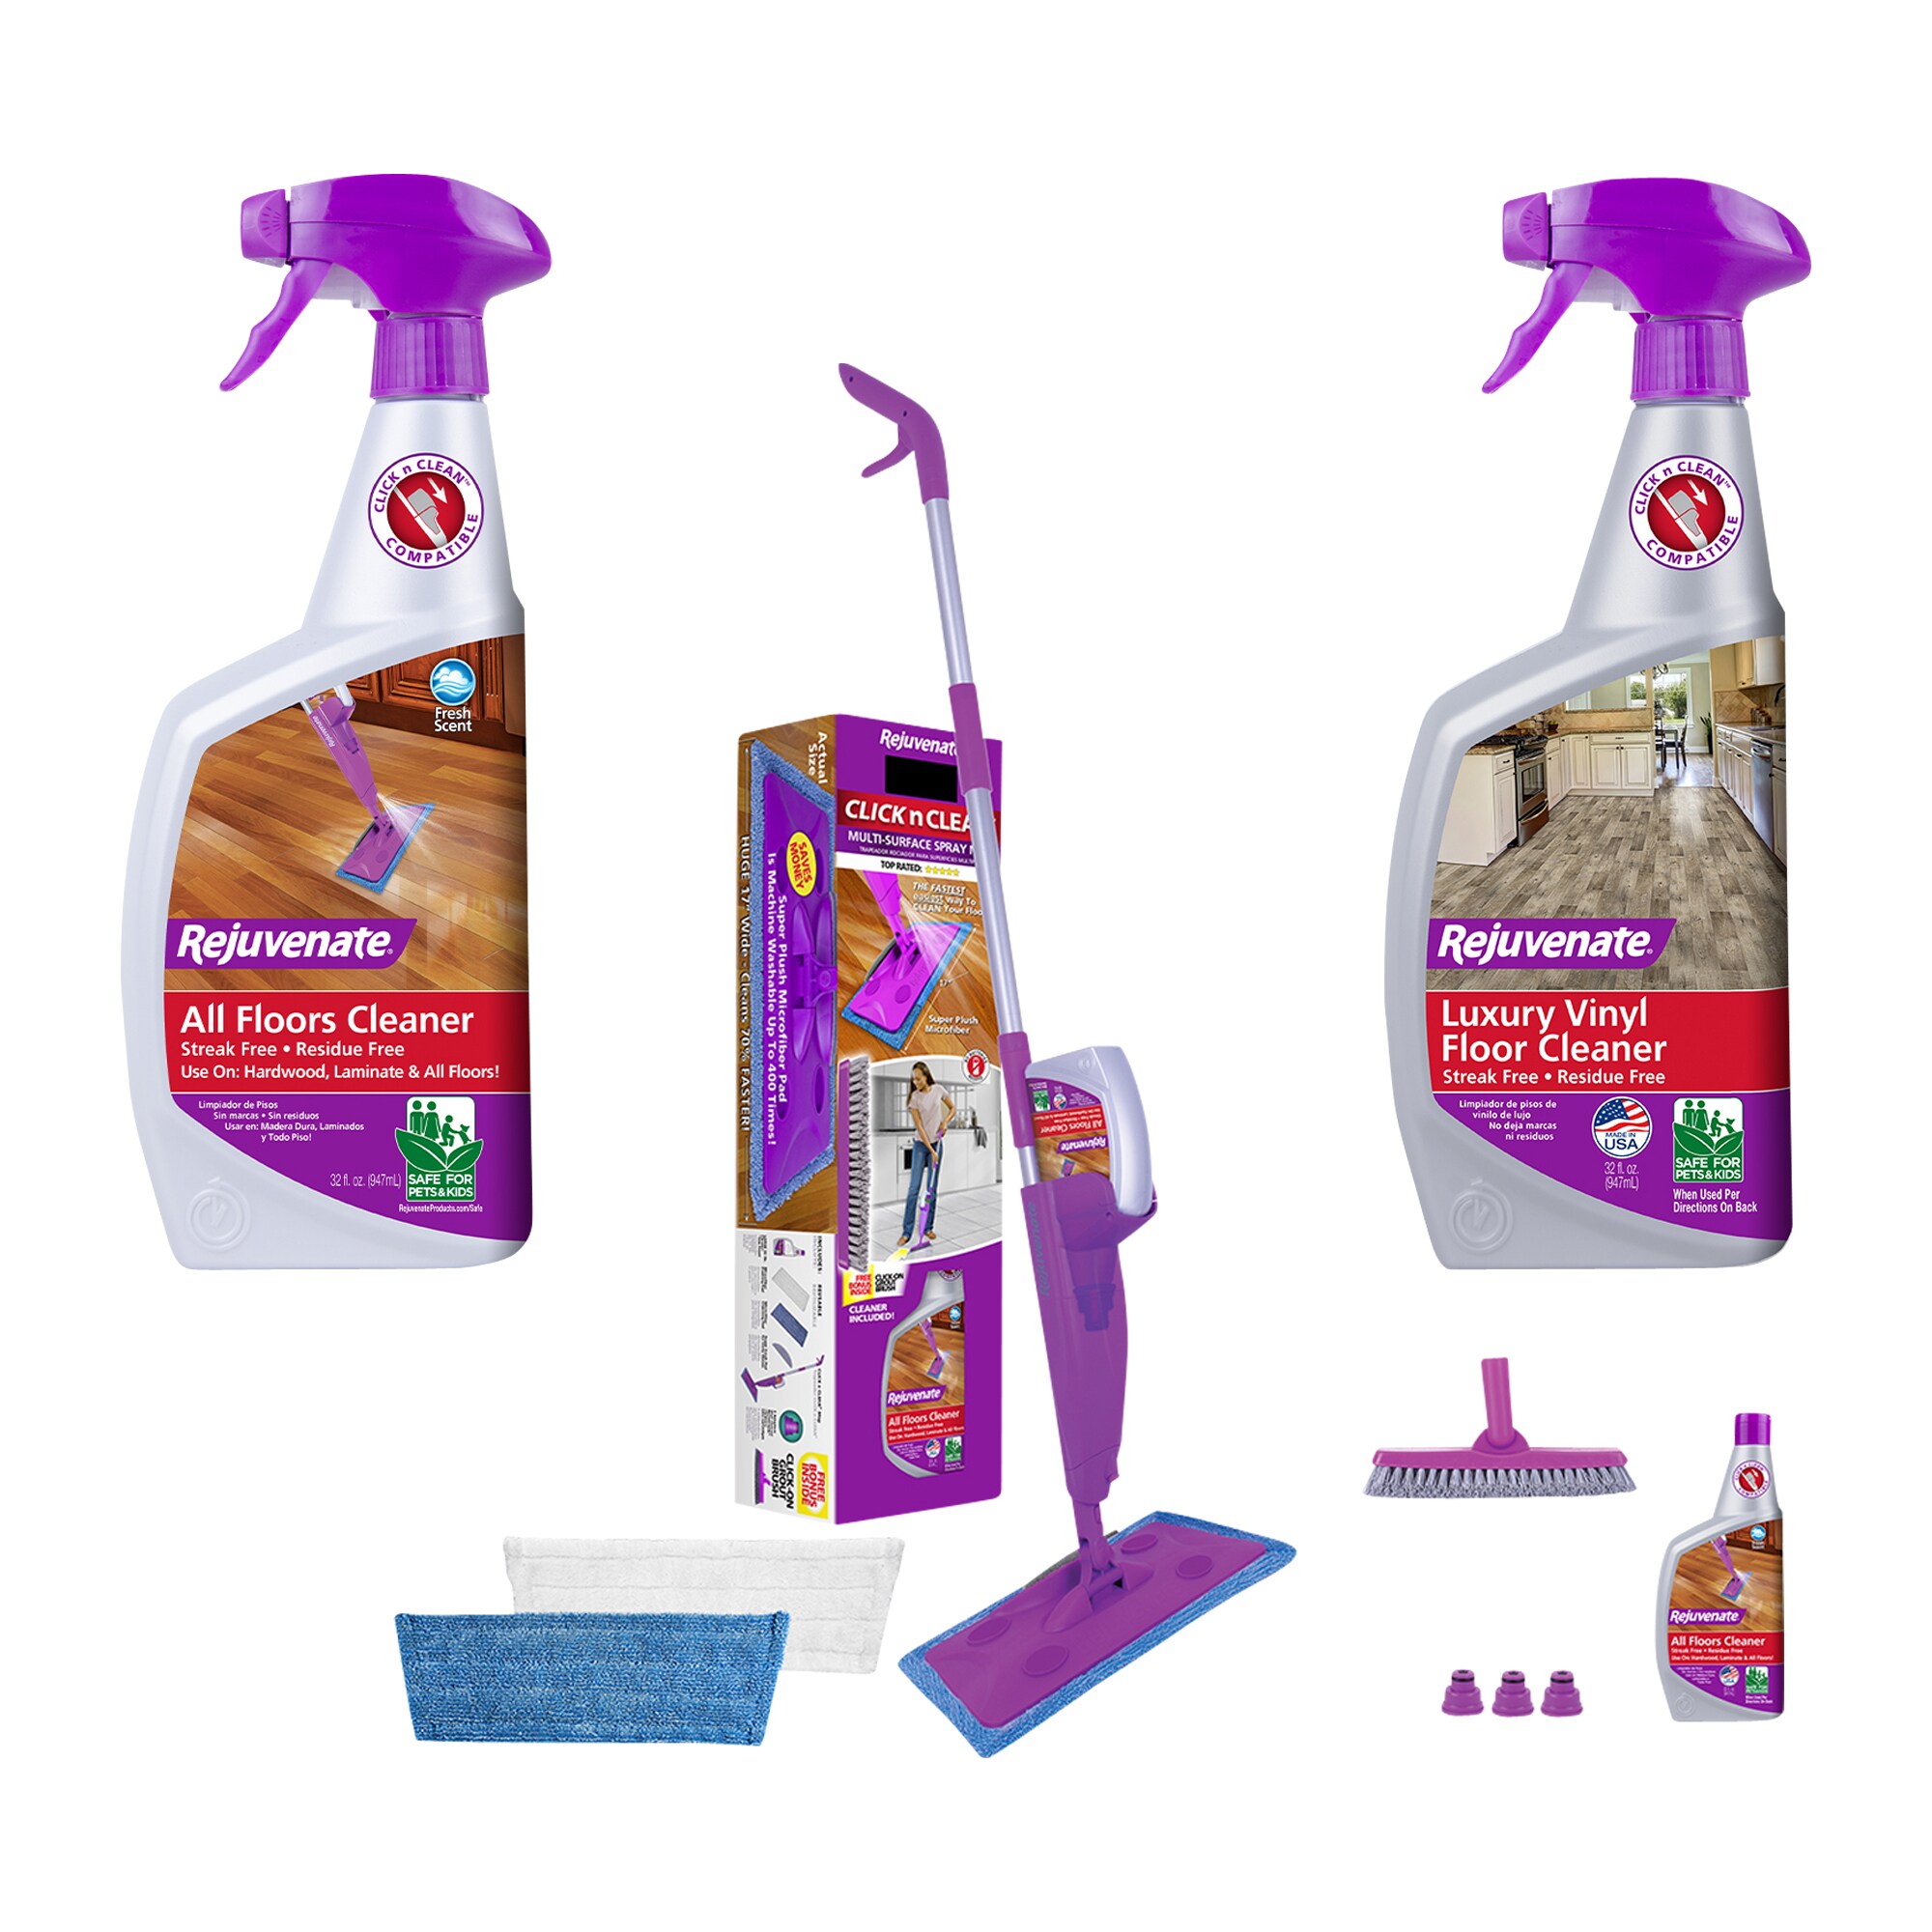 Shop Zep Grout Cleaning Kit with Zep Grout Cleaner and Grout/Tile Cleaning  Brush (Brush, Cleaner, Spray Bottle, and 50pk Mircofiber Cloth) at